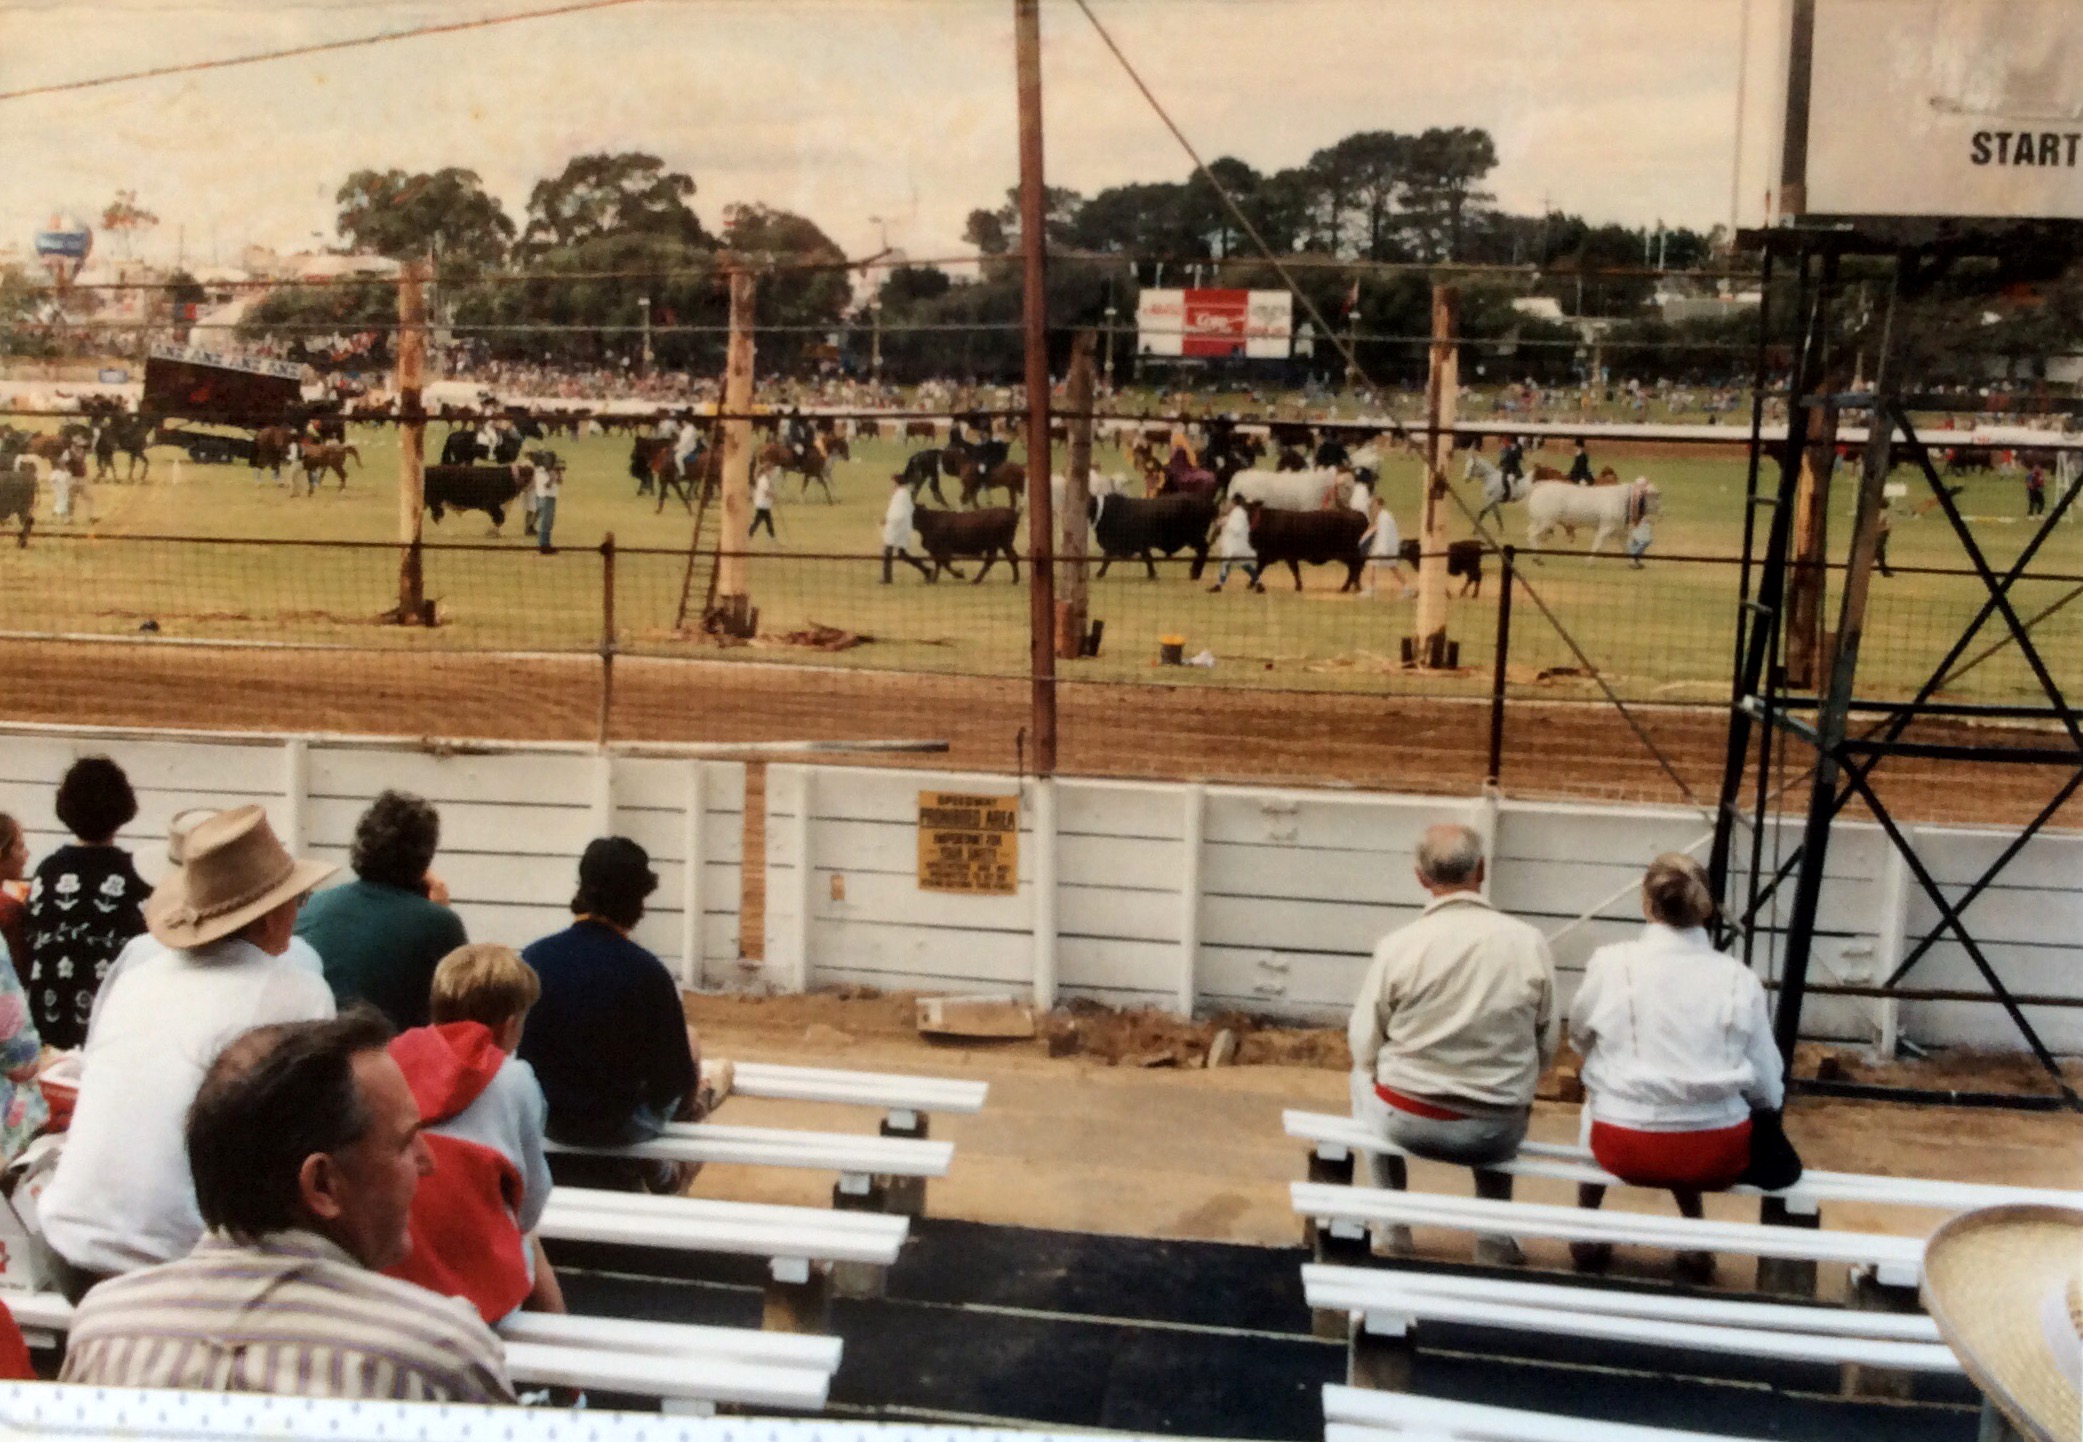 ROYAL SHOW GROUNDS - 28th September 1992